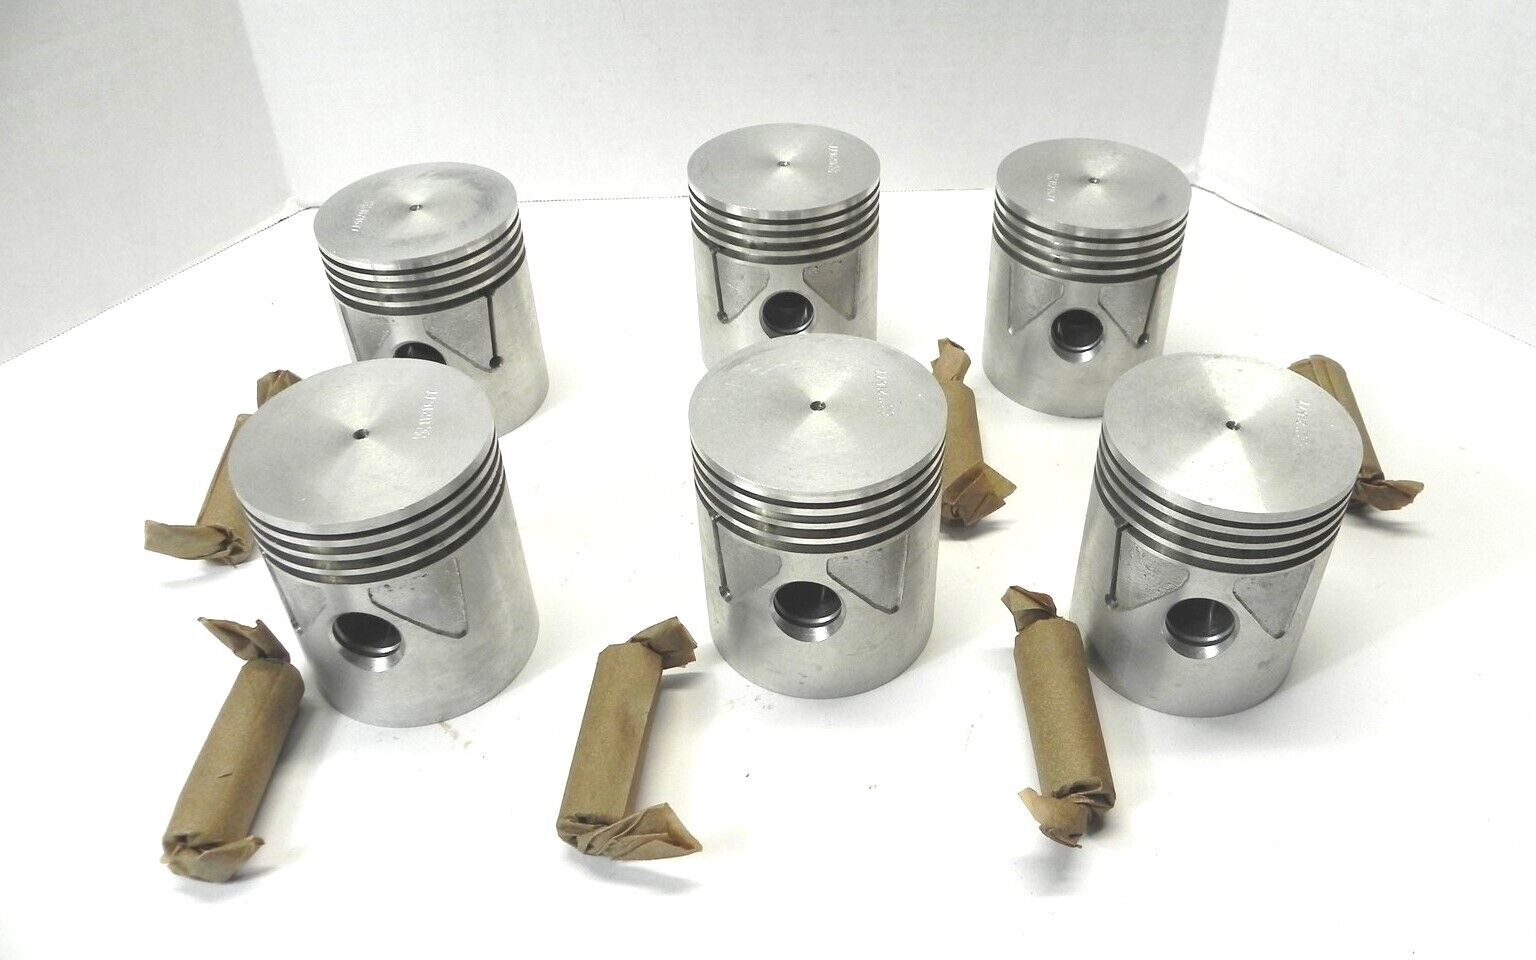 VINTAGE MOPAR SEMI PISTONS SET OF 6 #1121677 WITH PINS AND PAPERWORK NOS 